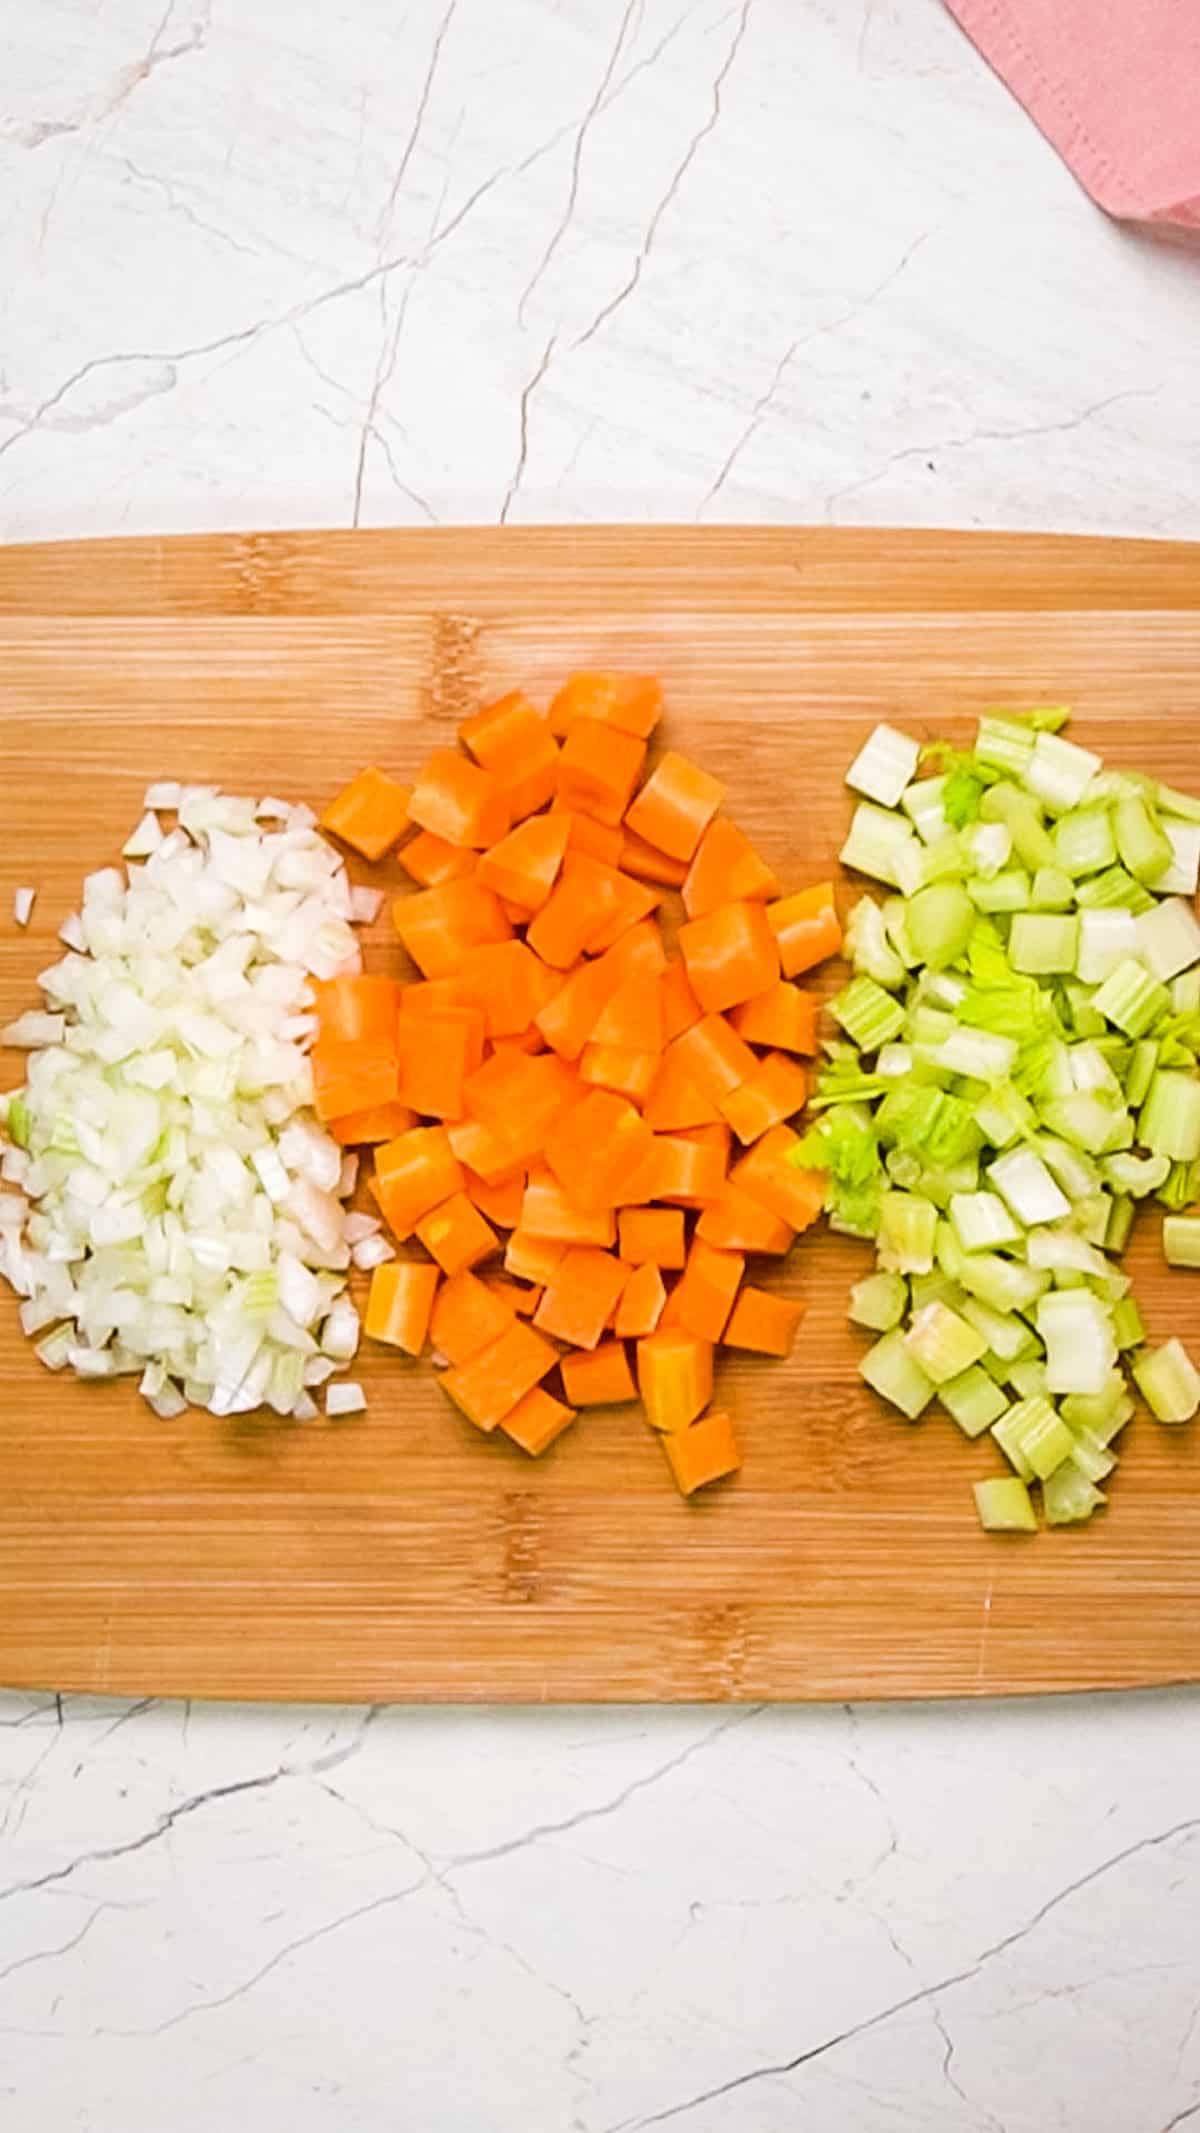 Overhead shot of onions, carrots and celery chopped into even pieces.